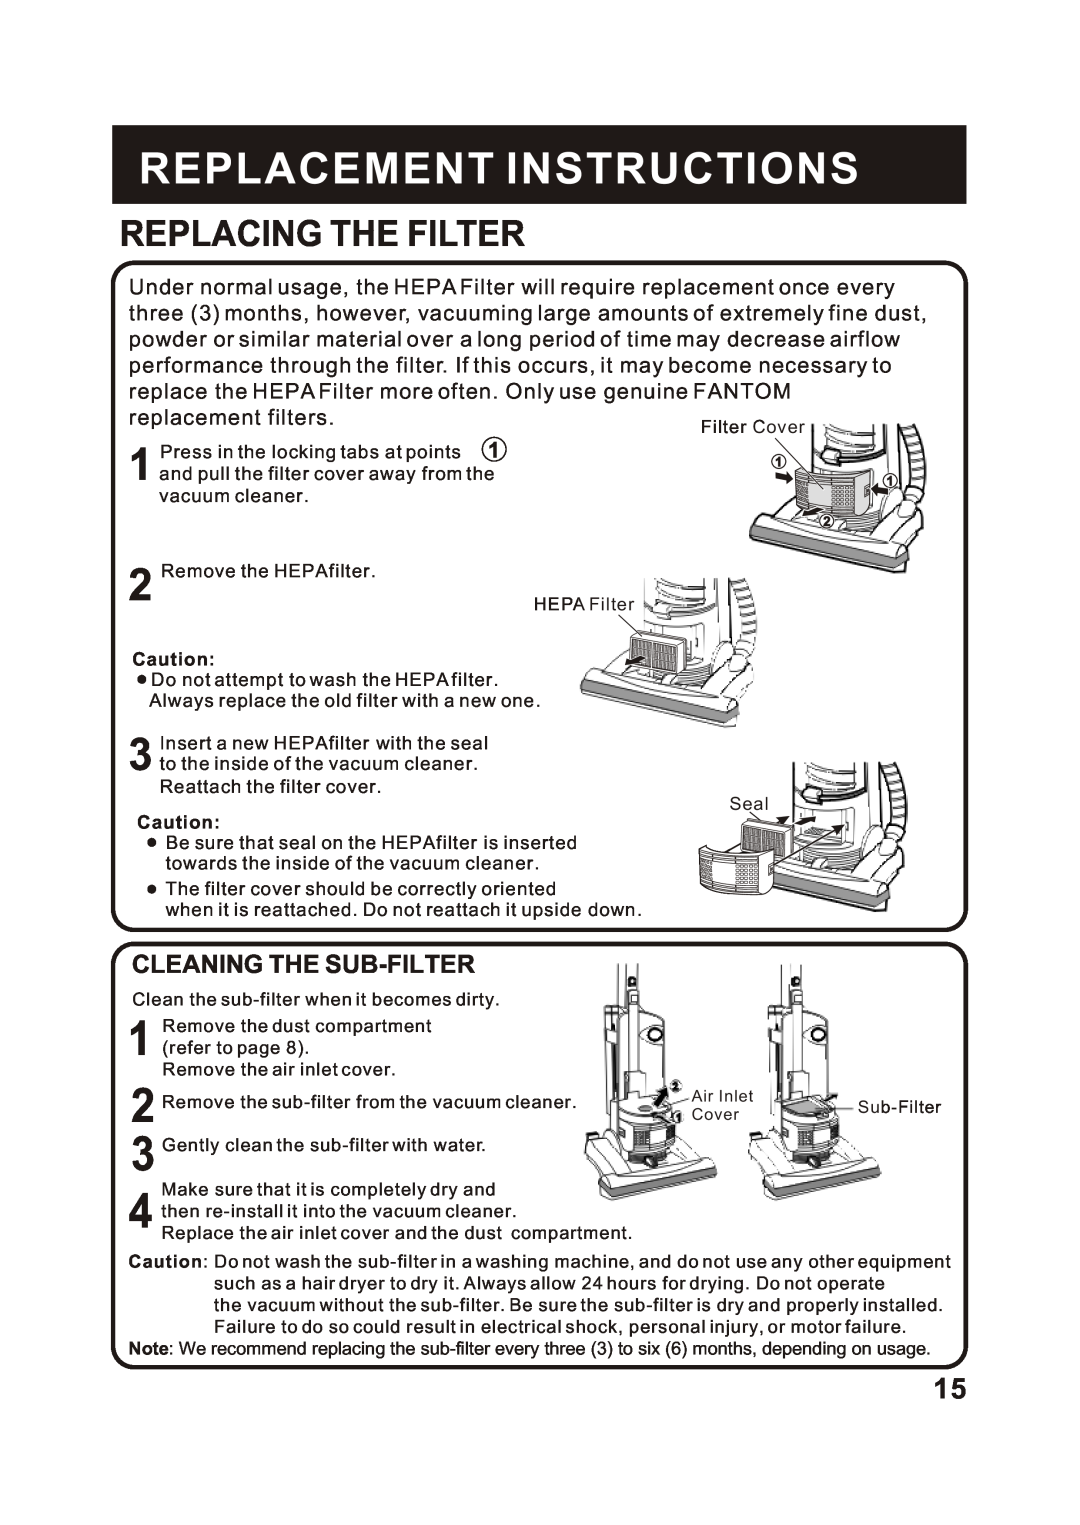 Fantom Vacuum FM743 instruction manual Replacing The Filter, Cleaning The Sub-Filter, Replacement Instructions 